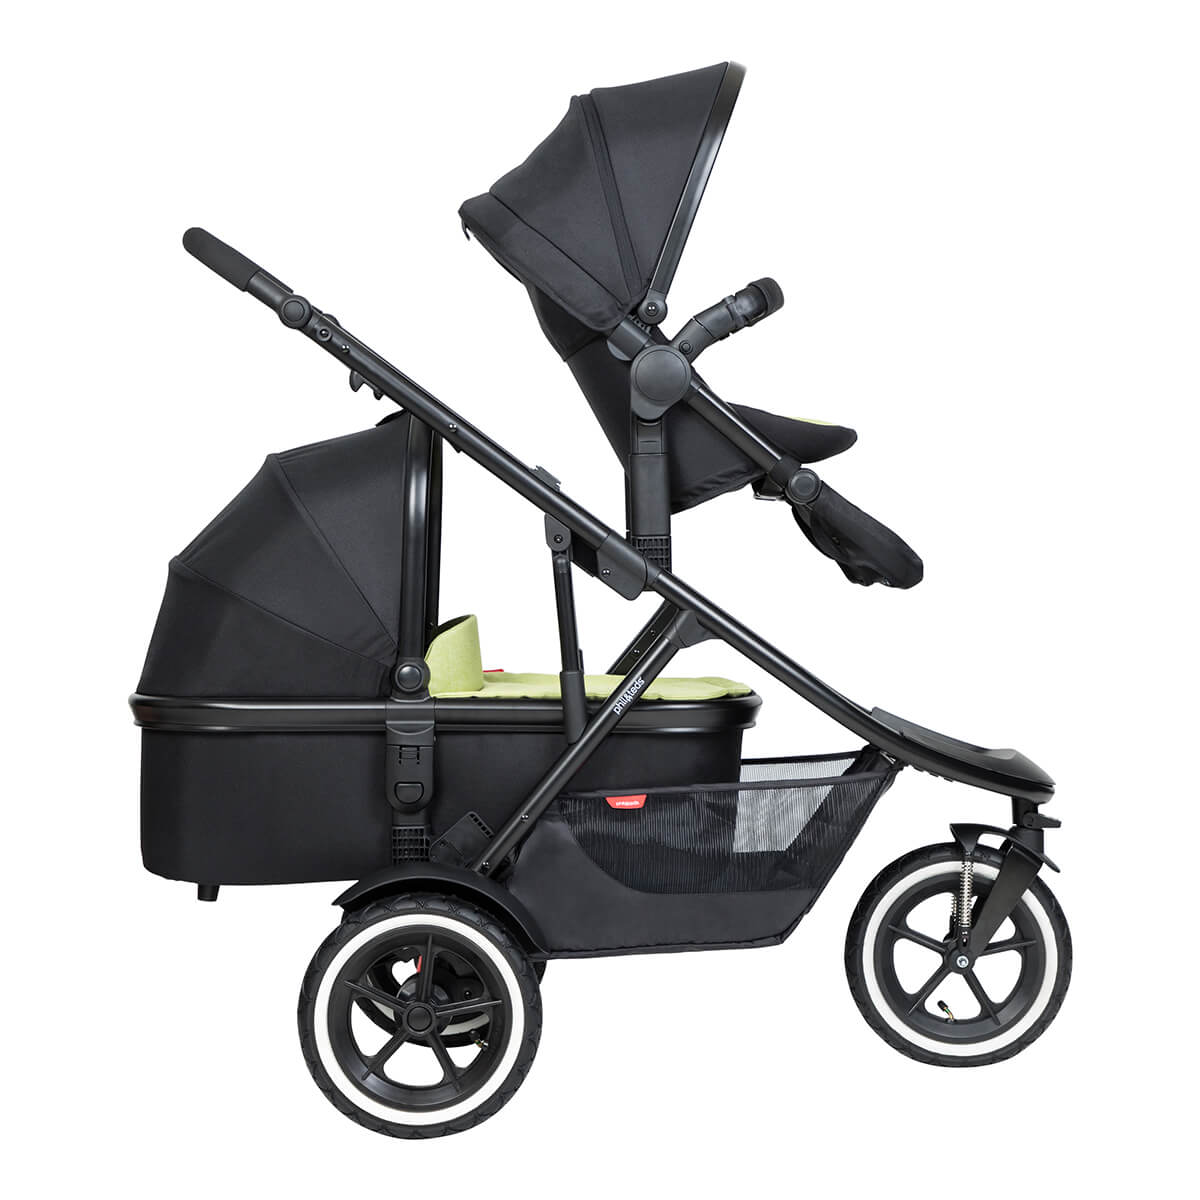 https://cdn.accentuate.io/4509898735693/19466204250306/philteds-sport-buggy-with-double-kit-extended-clip-and-snug-carrycot-side-view-v1626485359610.jpg?1200x1200